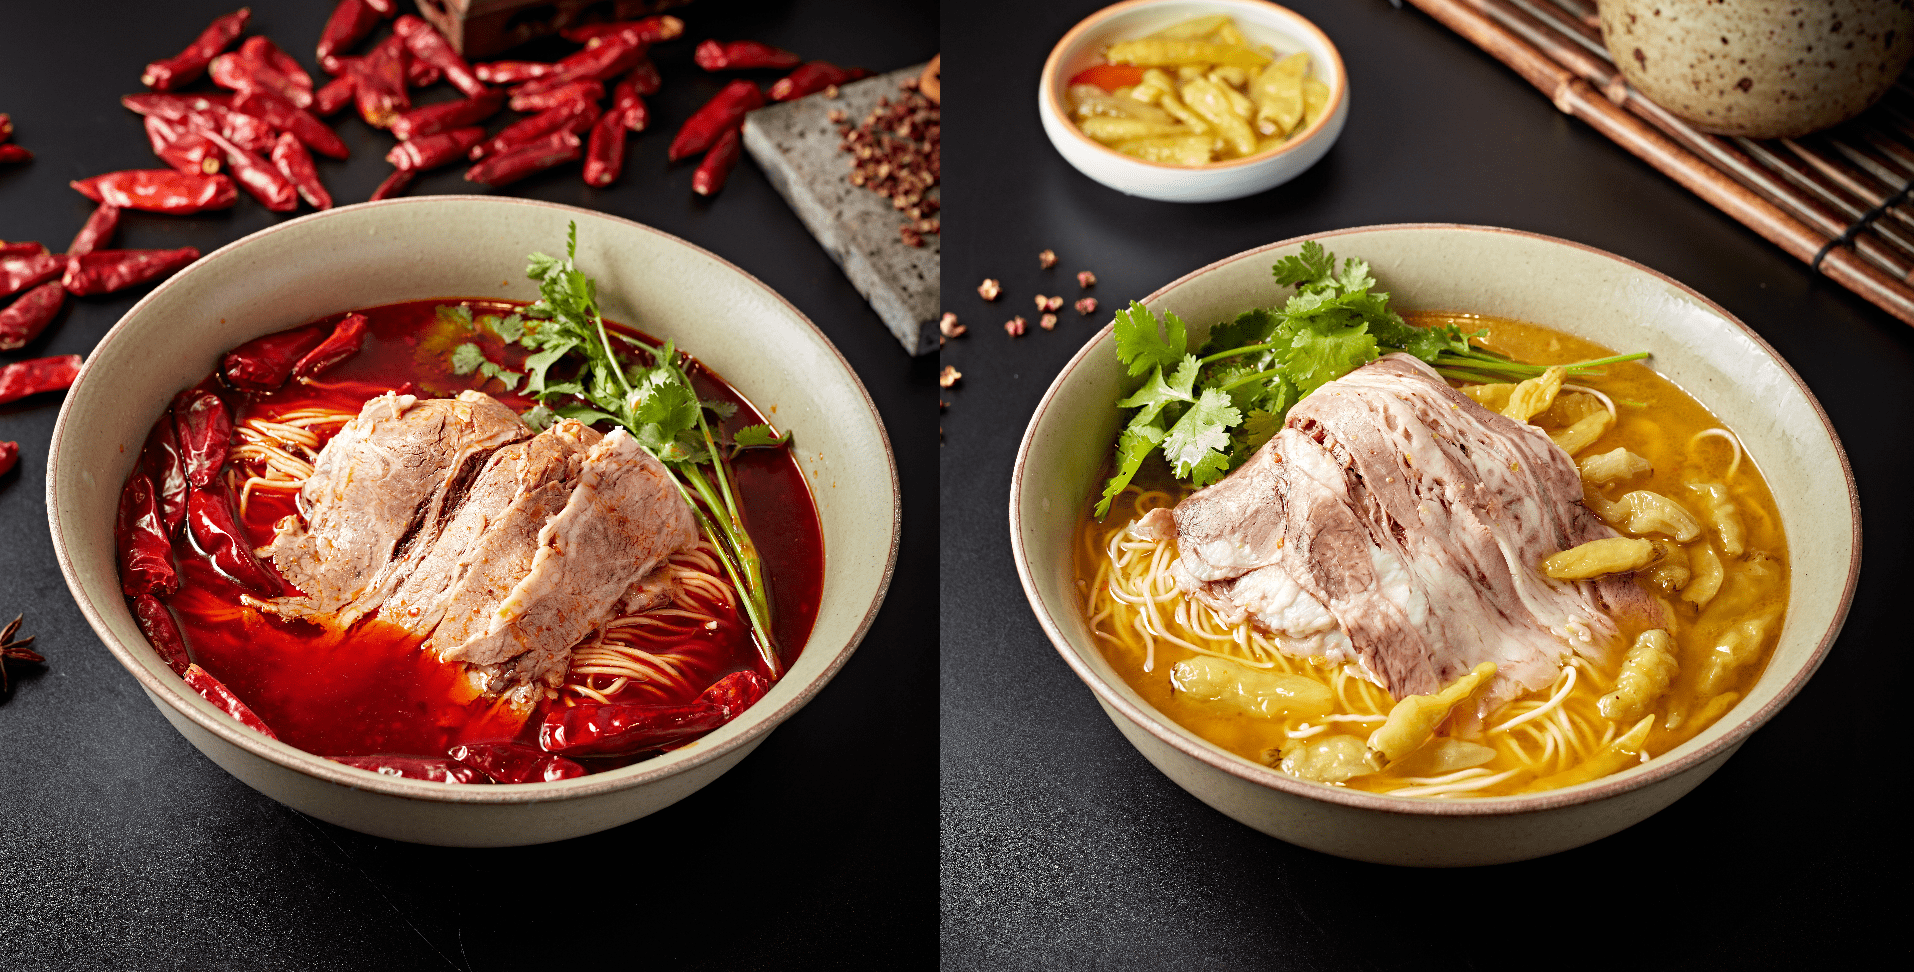 CMC Capital leads $124m Series E round for Chinese restaurant chain operator Hefu-Noodle